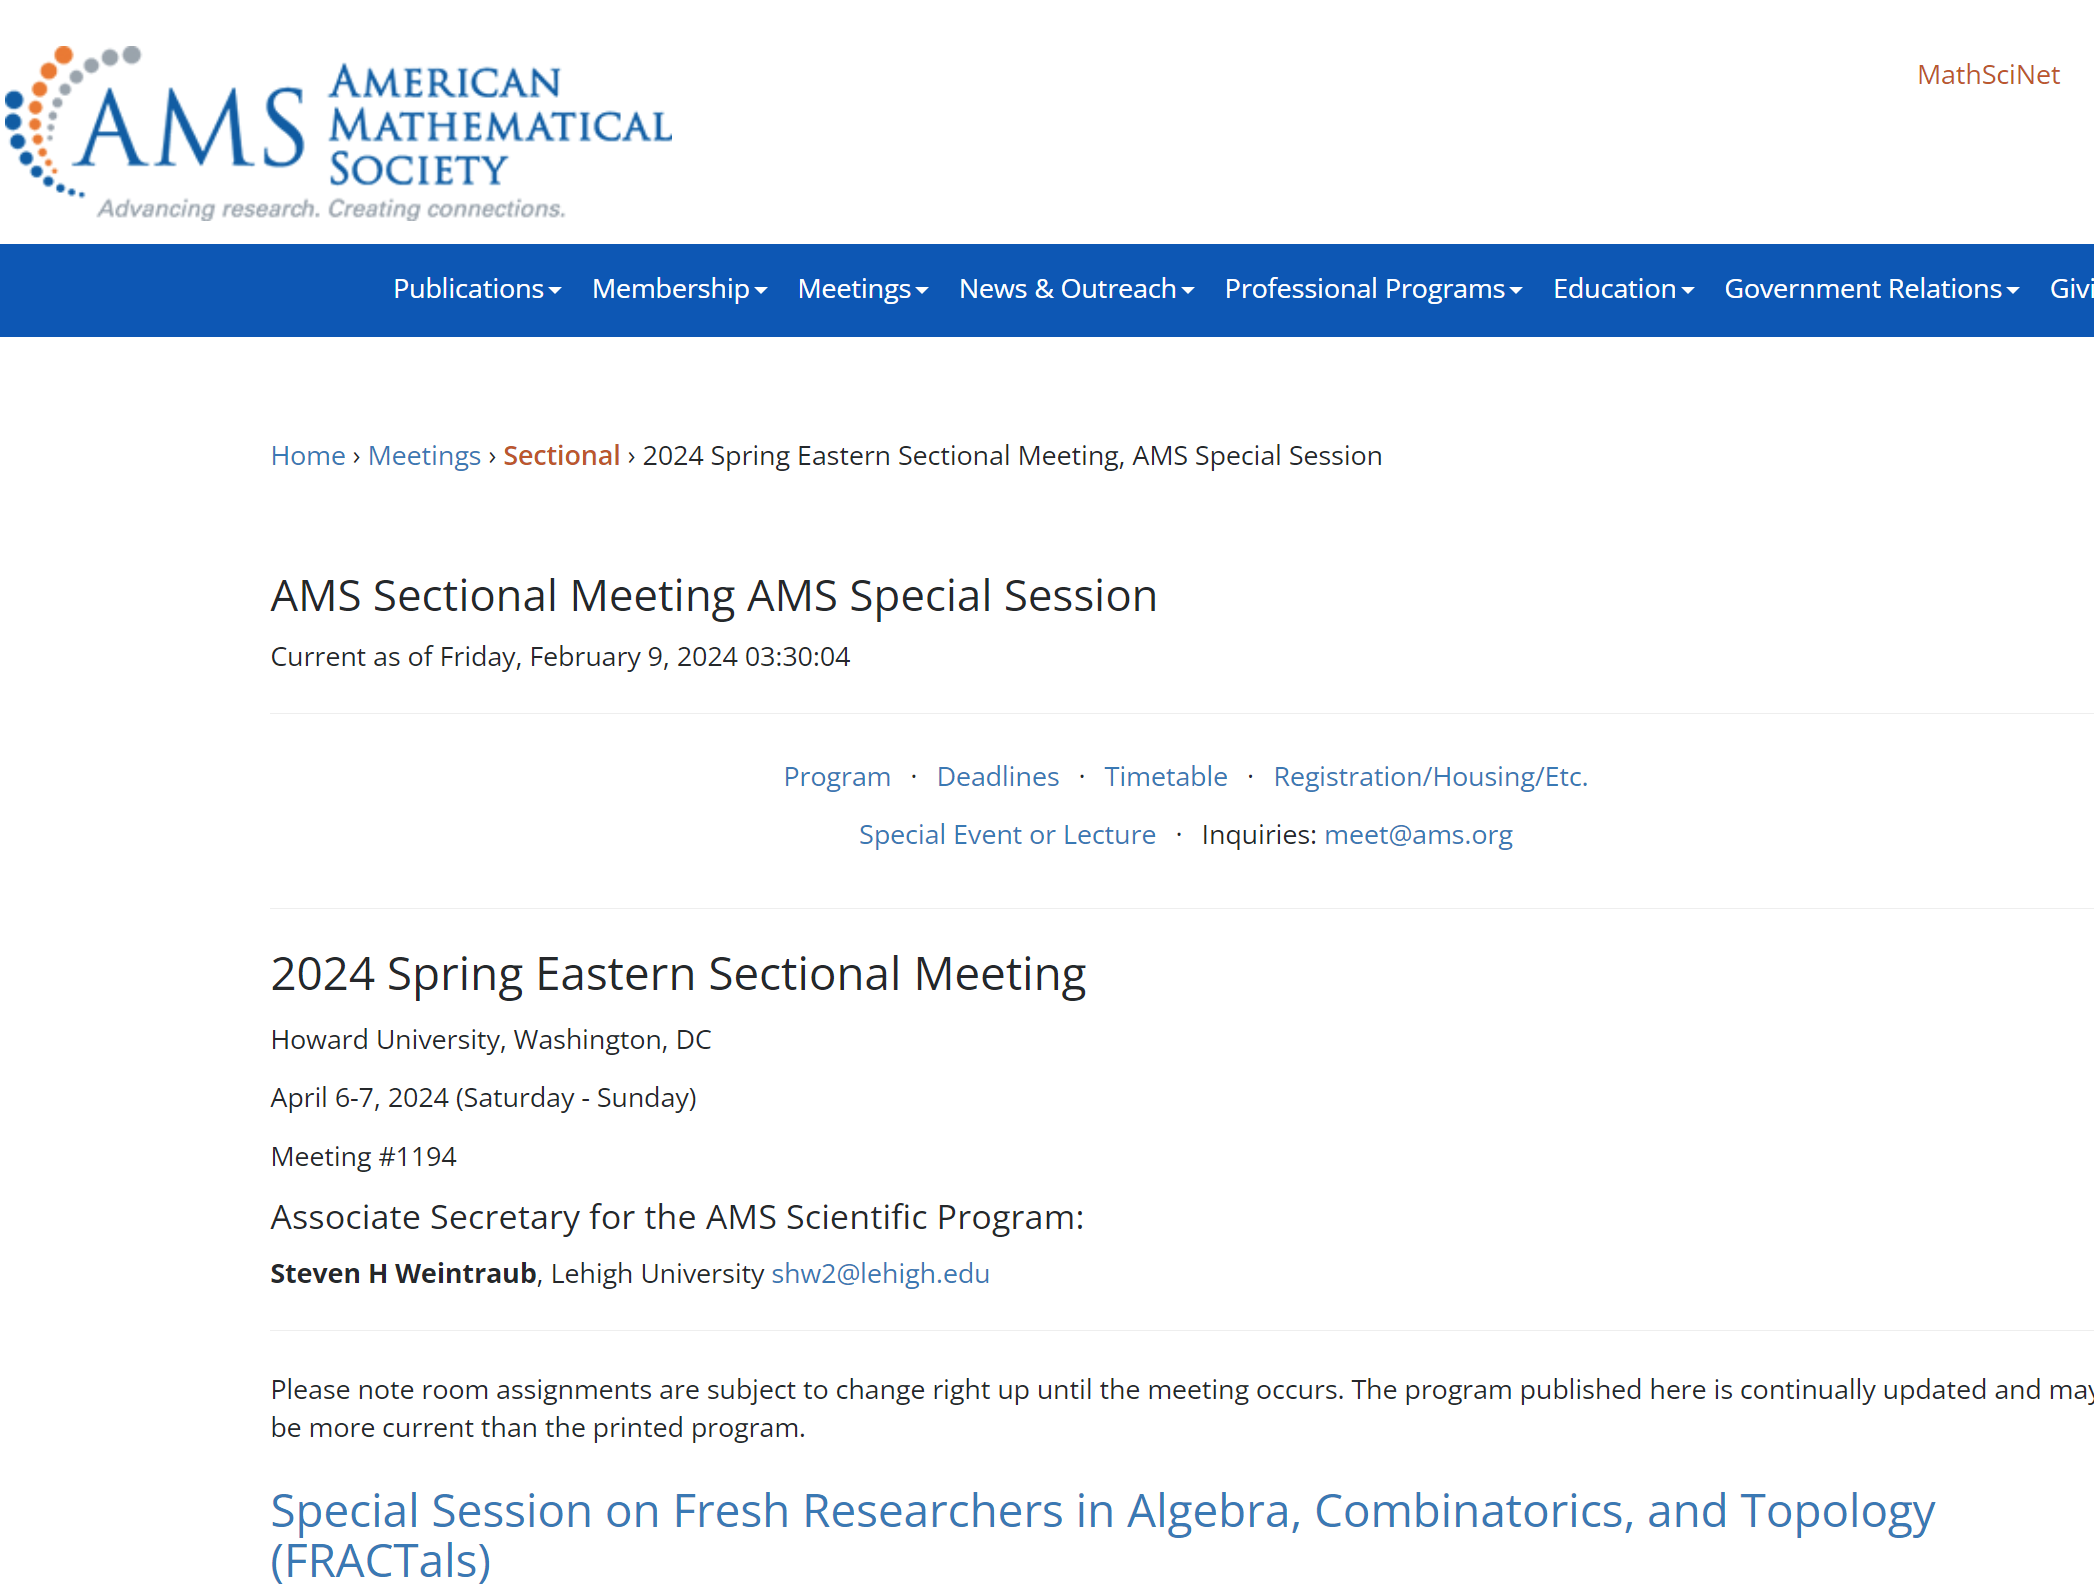 AMS 2024 Spring Eastern Sectional Meeting